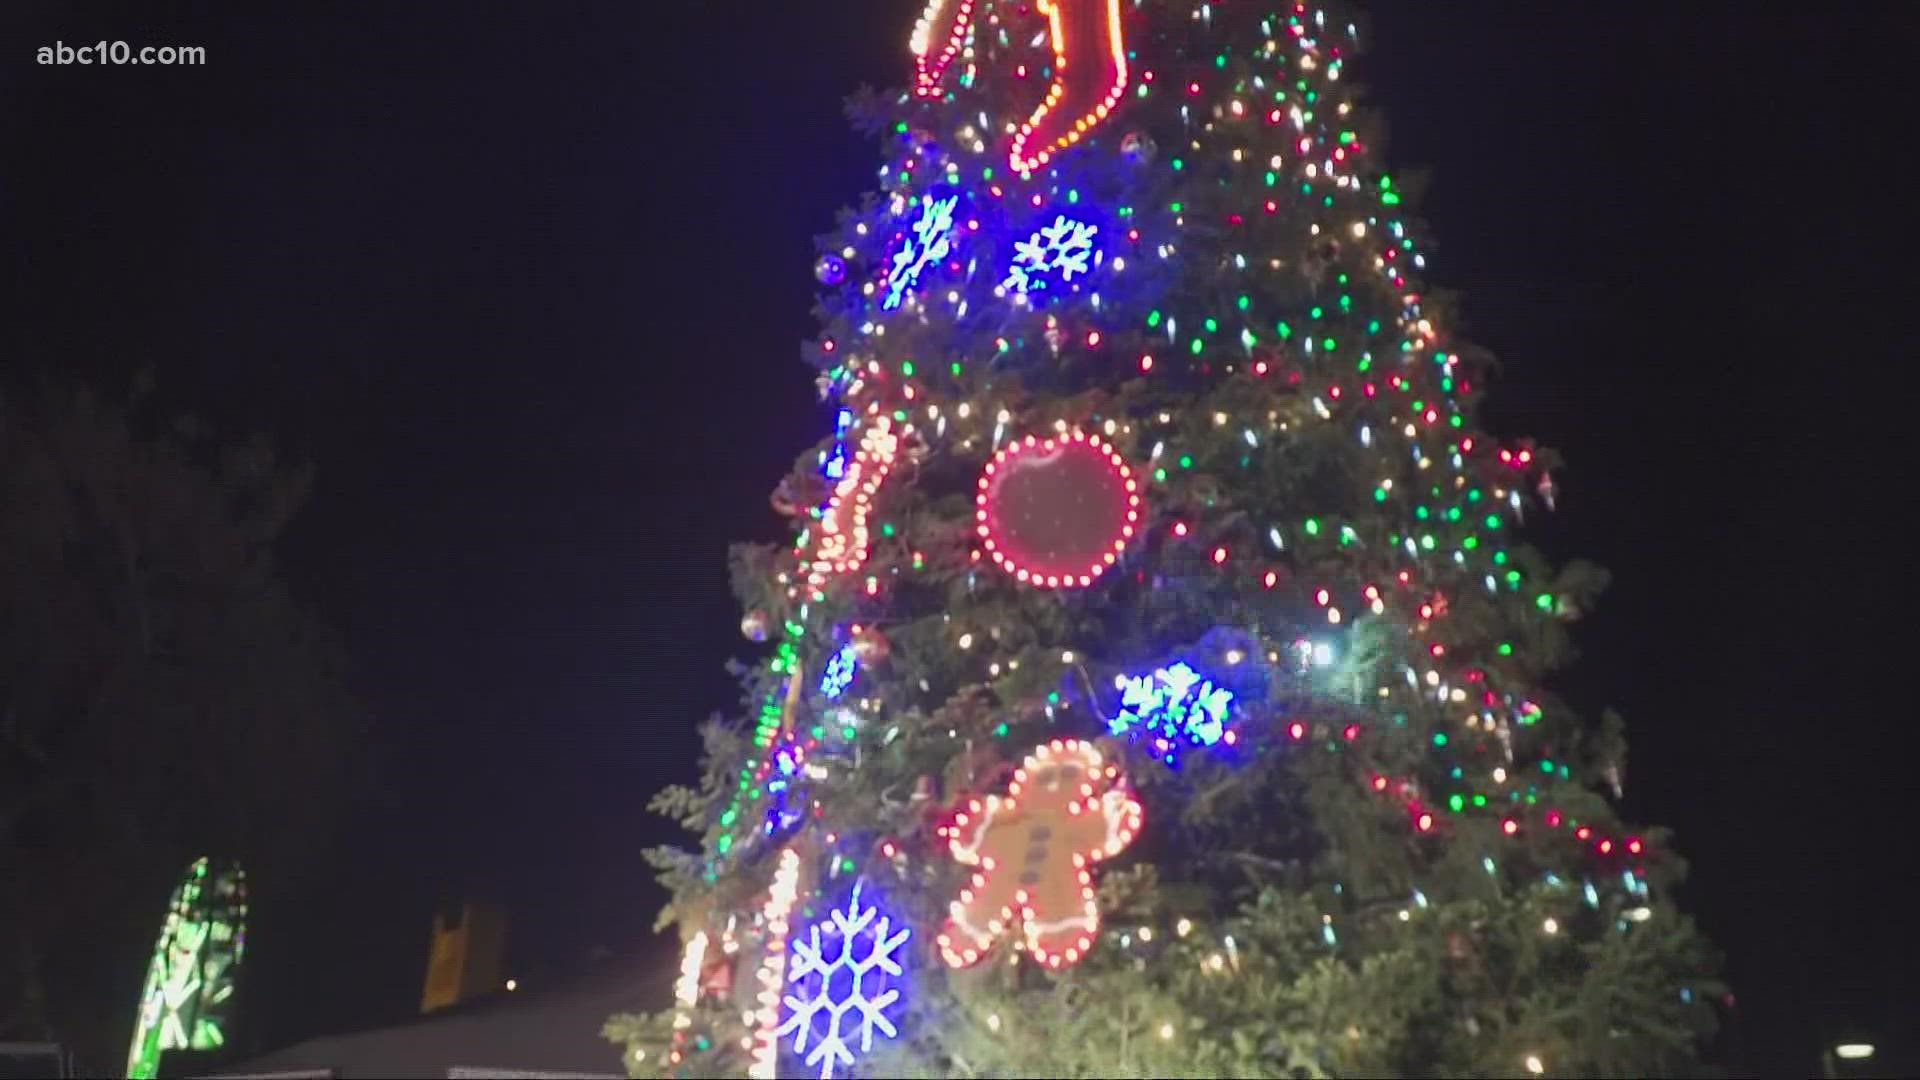 Each night the Golden 1 Credit Union Christmas tree will be lit up inviting visitors to old Sacramento — hoping for a Christmas comeback after a tough year.